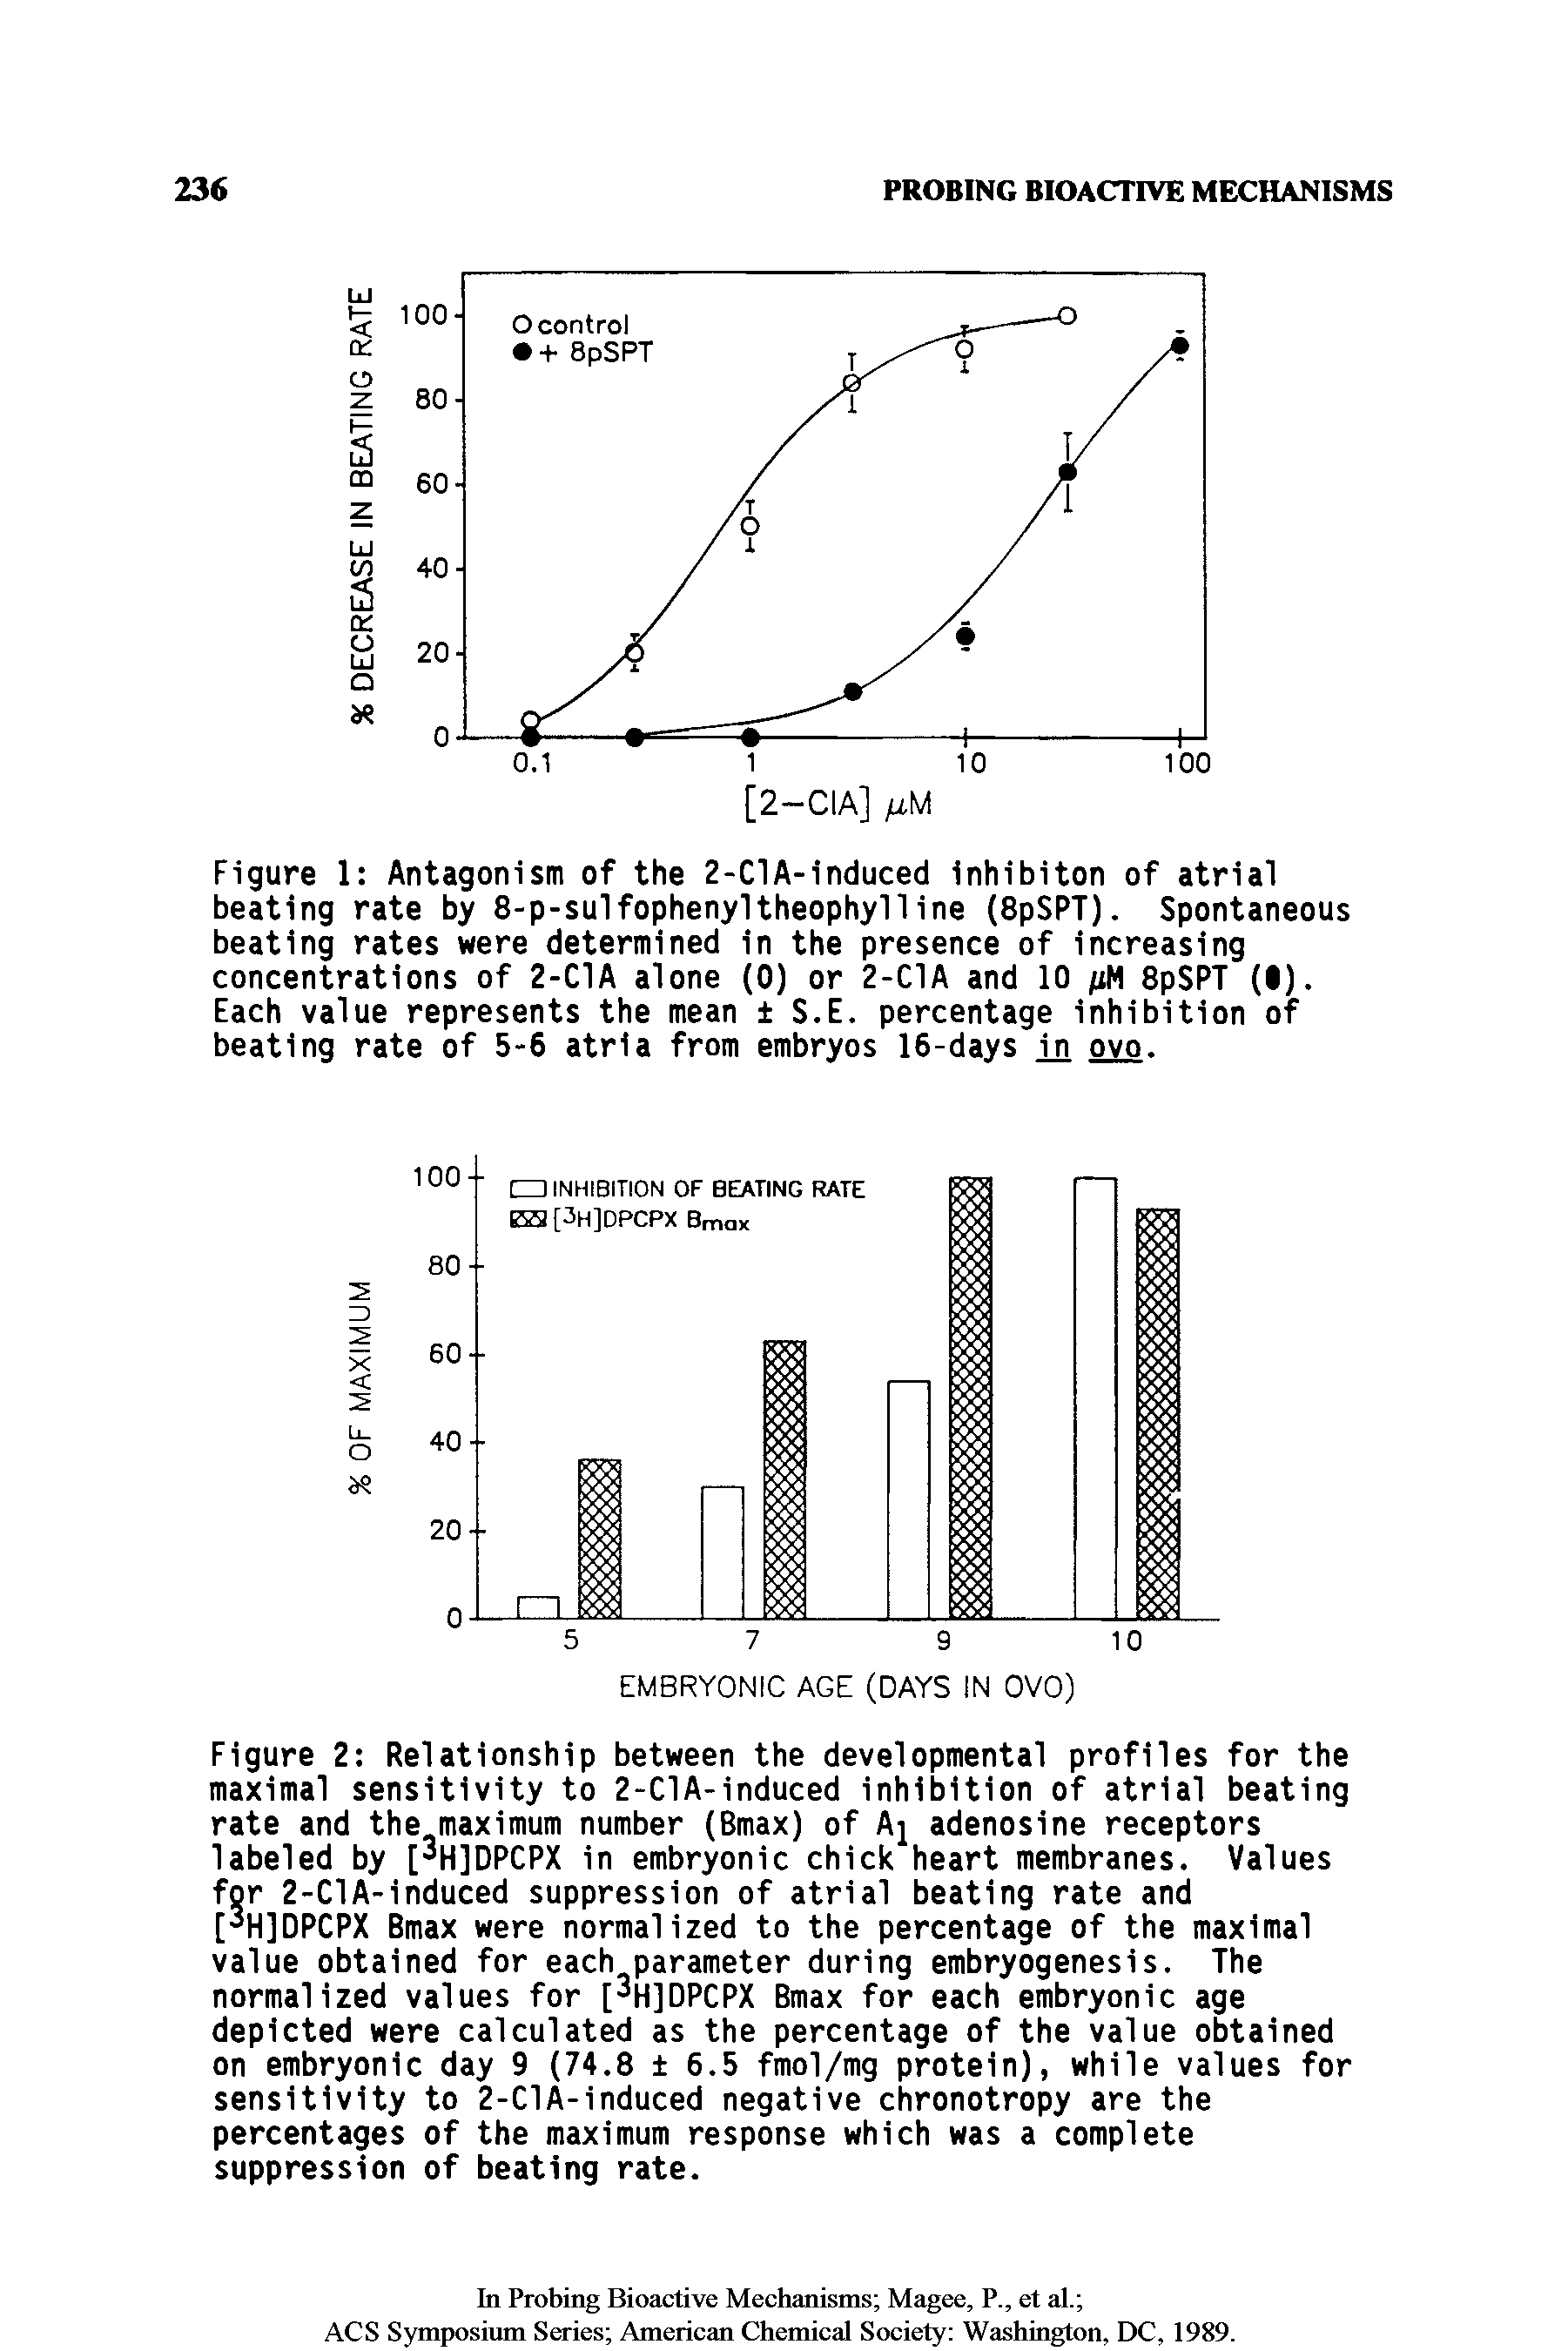 Figure 2 Relationship between the developmental profiles for the maximal sensitivity to 2-ClA-induced inhibition of atrial beating rate and the maximum number (Bmax) of Aj adenosine receptors labeled by [ HJDPCPX in embryonic chick heart membranes. Values for 2-ClA-induced suppression of atrial beating rate and [ H]DPCPX Bmax were normalized to the percentage of the maximal value obtained for each parameter during embryogenesis. The normalized values for [ HJDPCPX Bmax for each embryonic age depicted were calculated as the percentage of the value obtained on embryonic day 9 (74.8 6.5 fmol/mg protein), while values for sensitivity to 2-ClA-induced negative chronotropy are the percentages of the maximum response which was a complete suppression of beating rate.